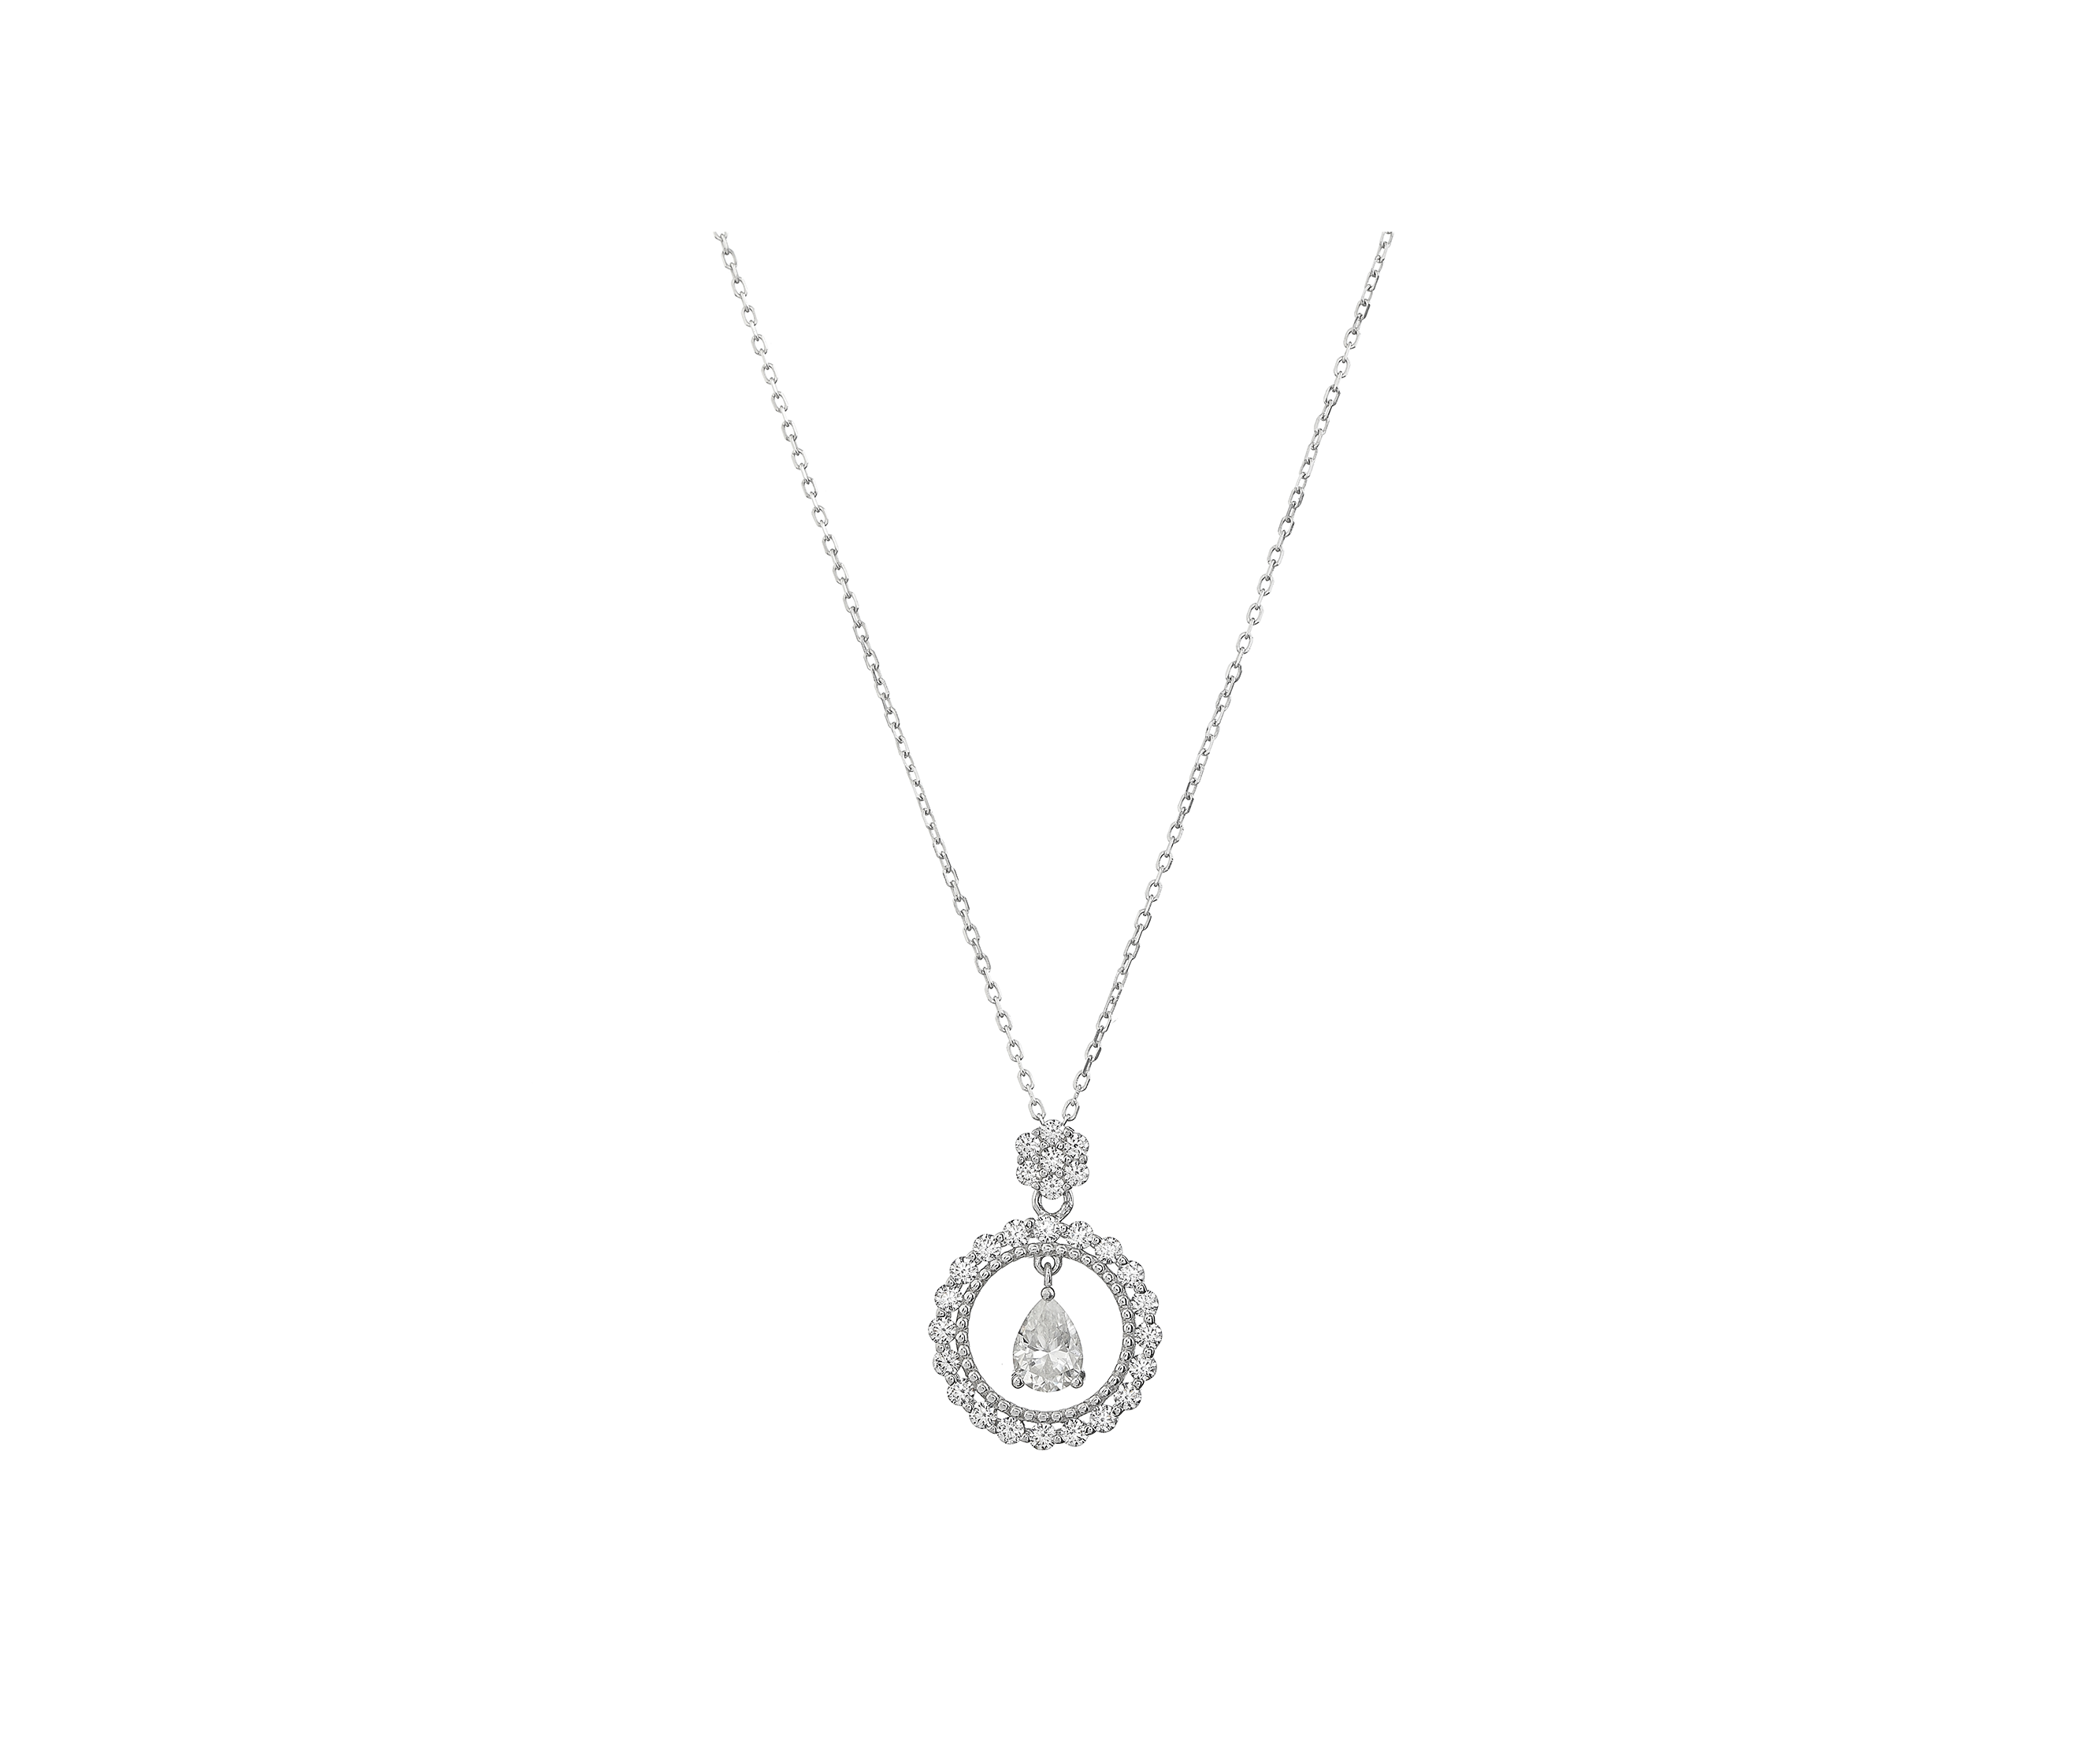 Ethereal Moissanite Studded Pendant with Sterling Silver Chain 